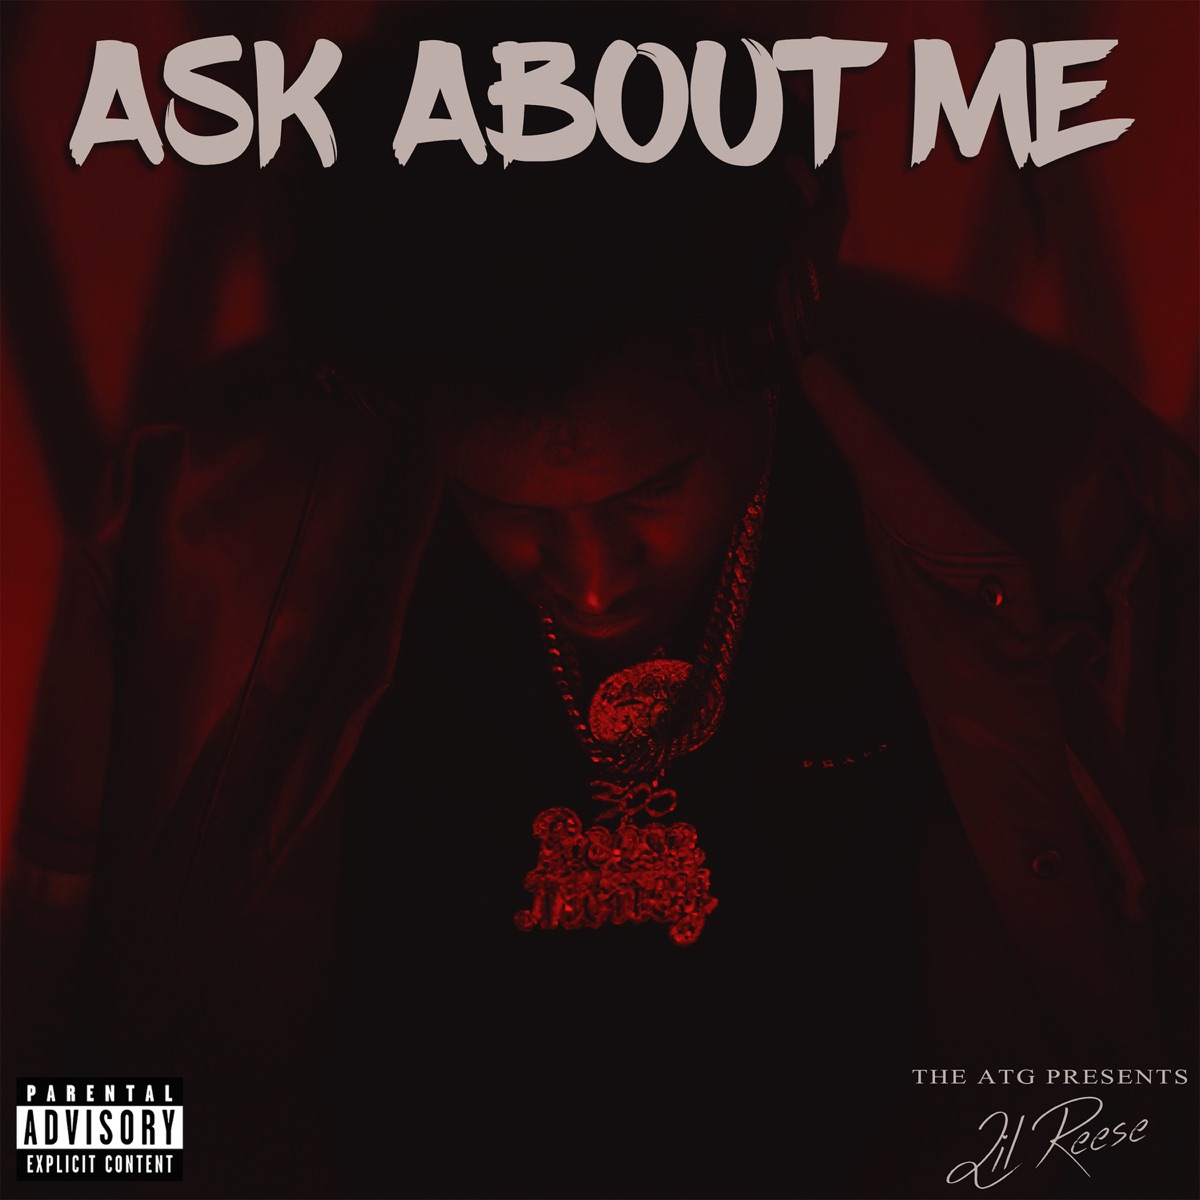 Lil Reese & ATG Productions – IDK (I Don’t Know)